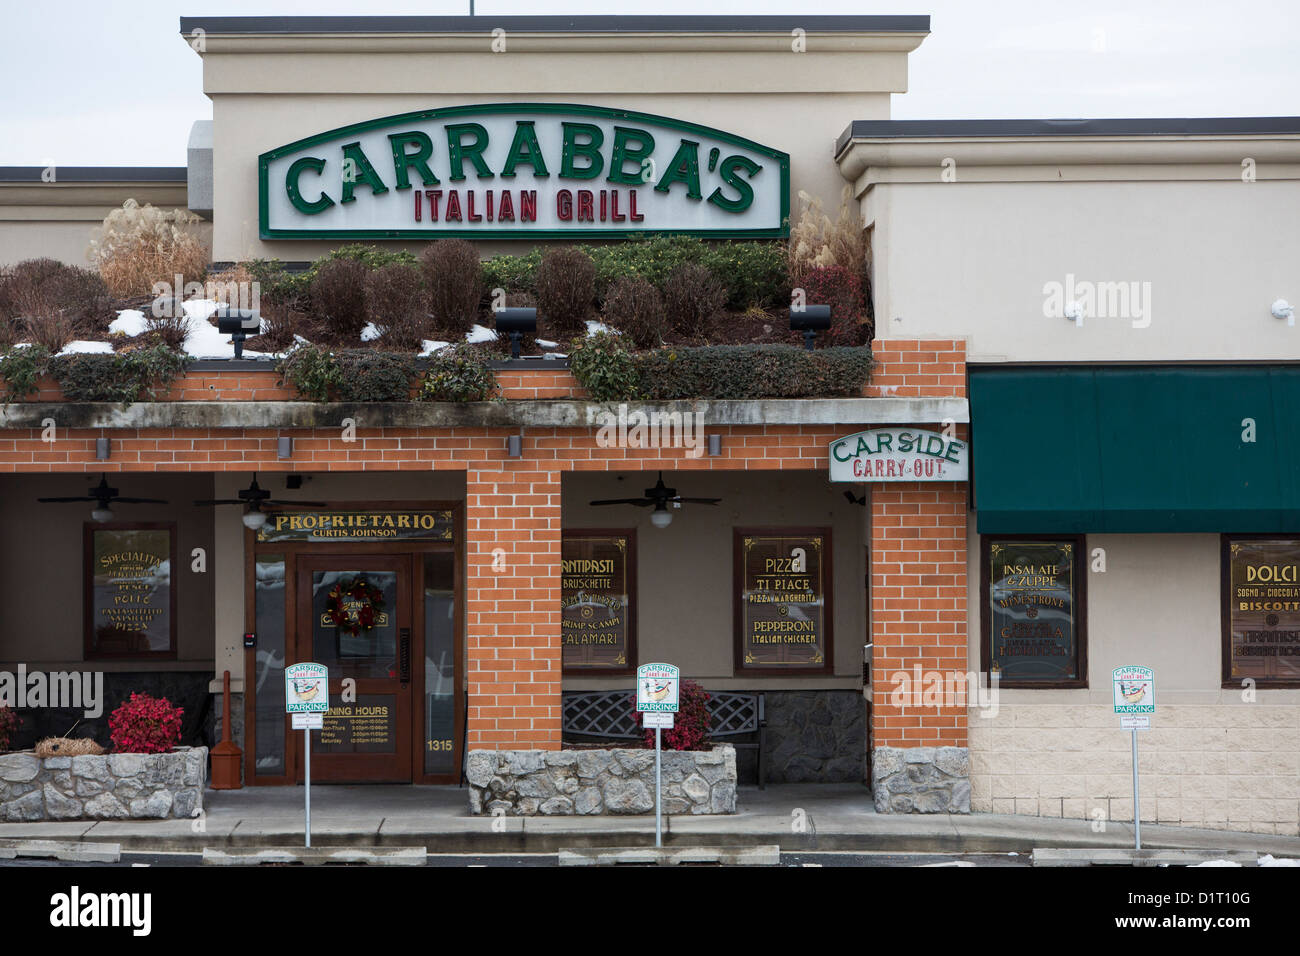 A Carrabba's Italian Grill casual dining chain restaurant.  Stock Photo